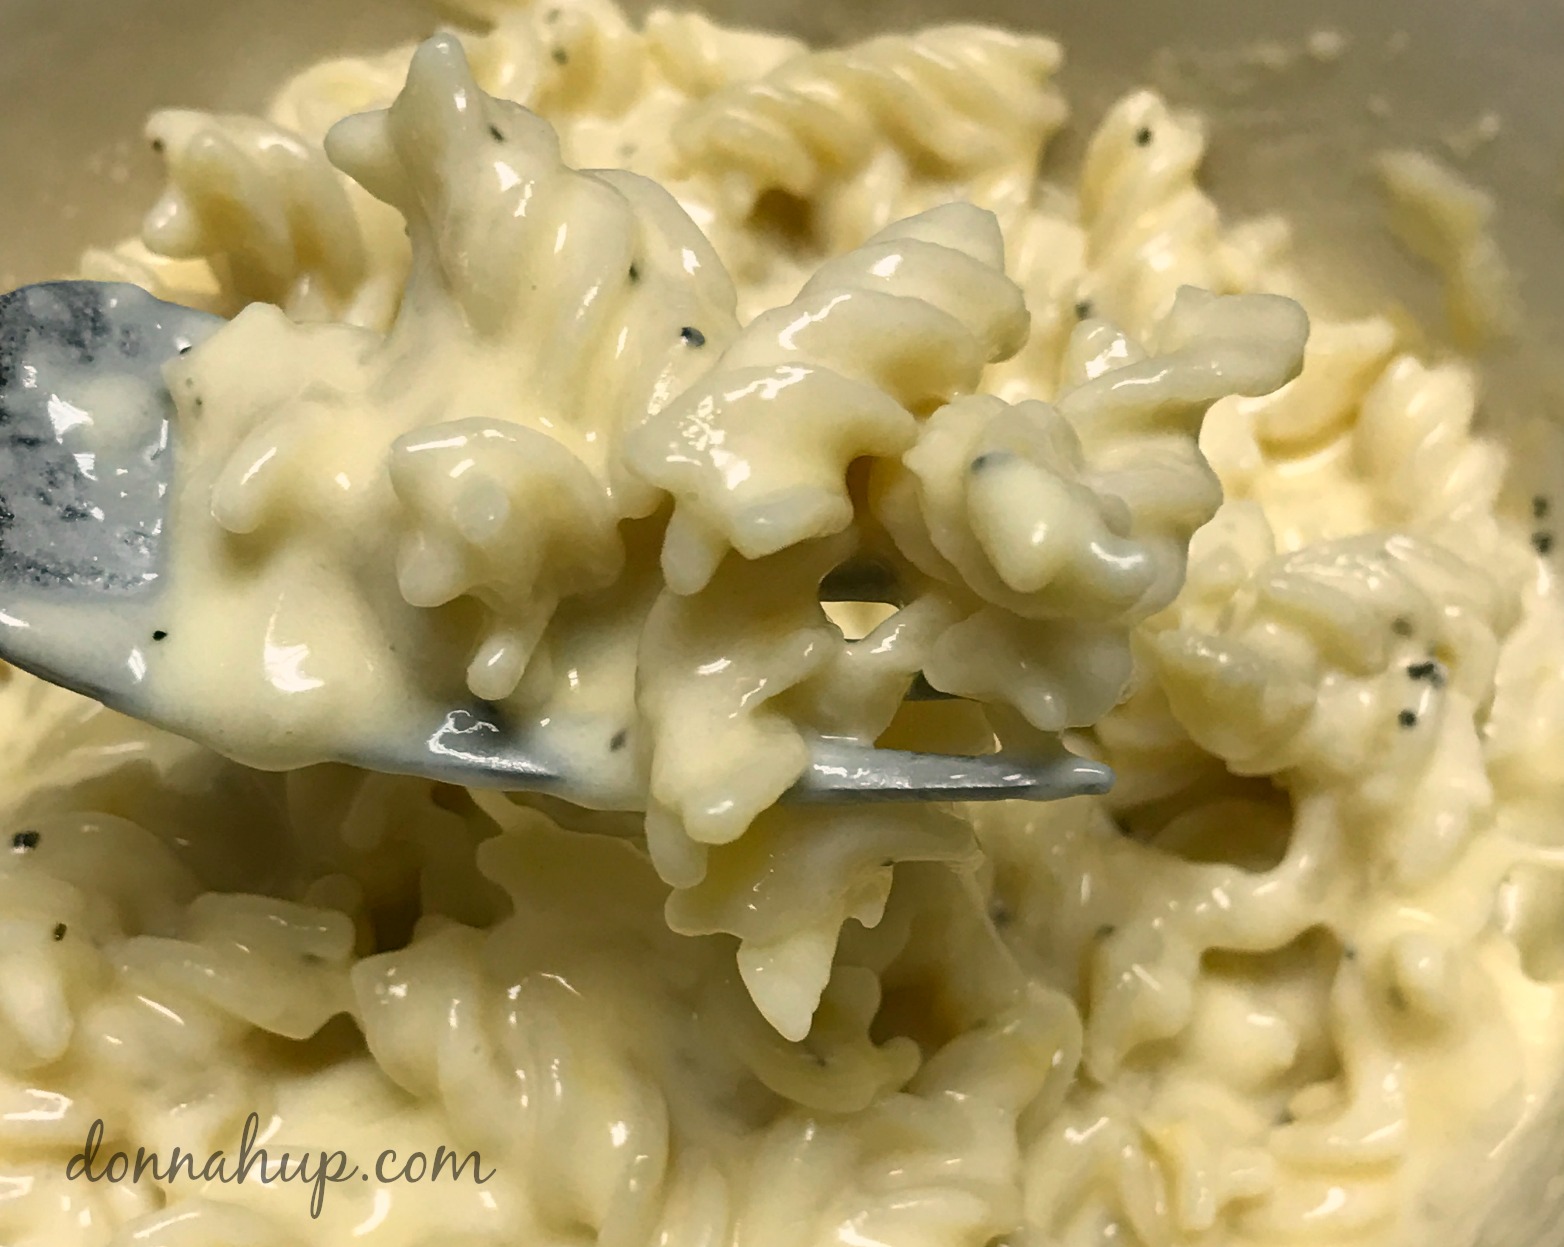 4 Minute Instant Pot Macaroni and Cheese